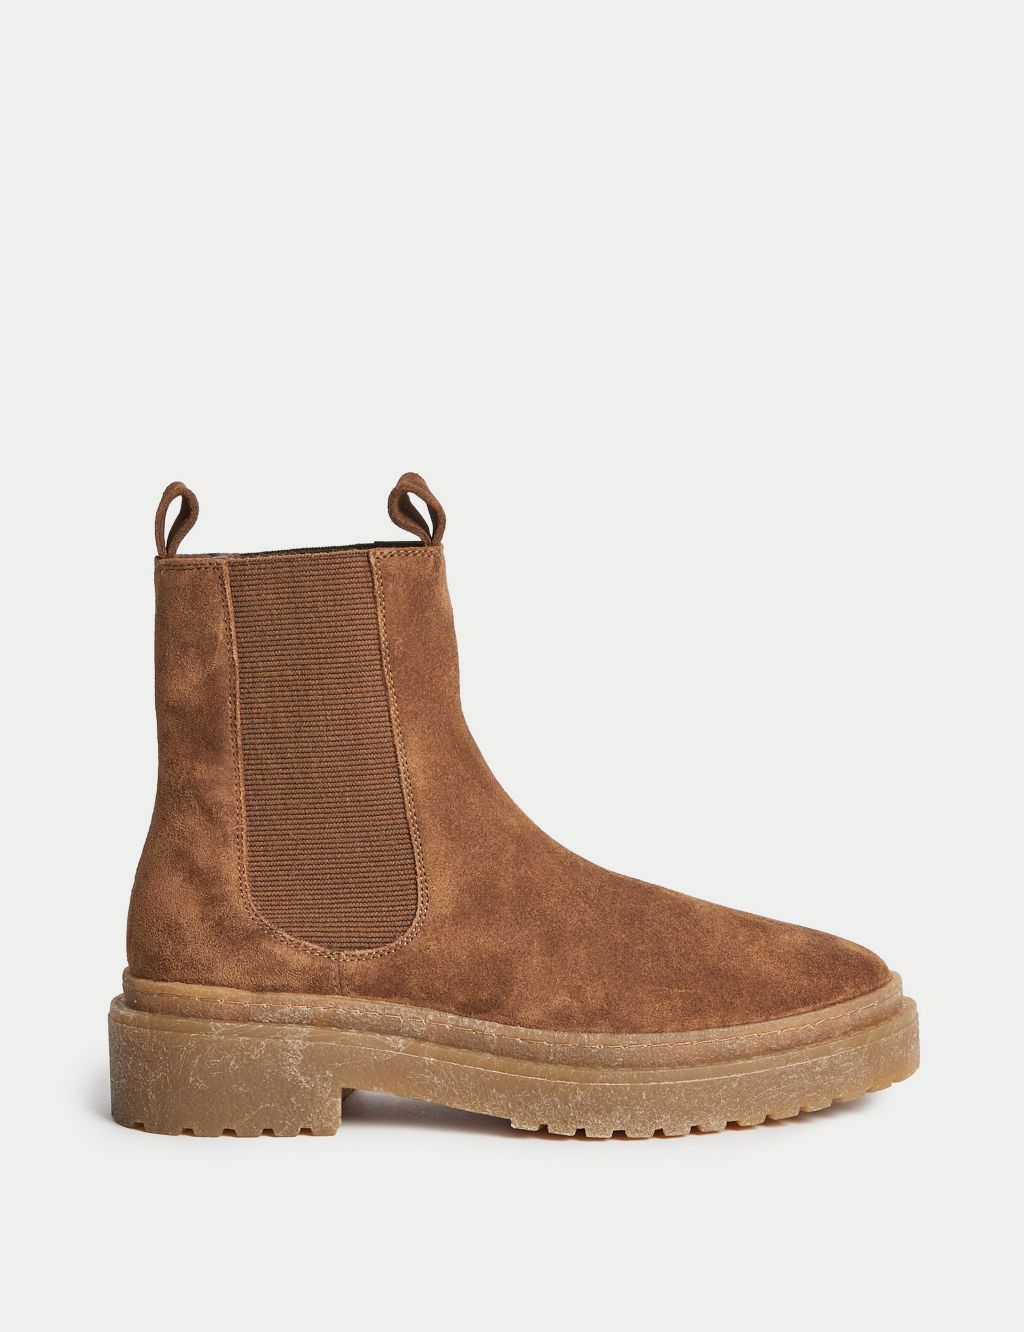 Suede Chelsea Flat Boots image 1